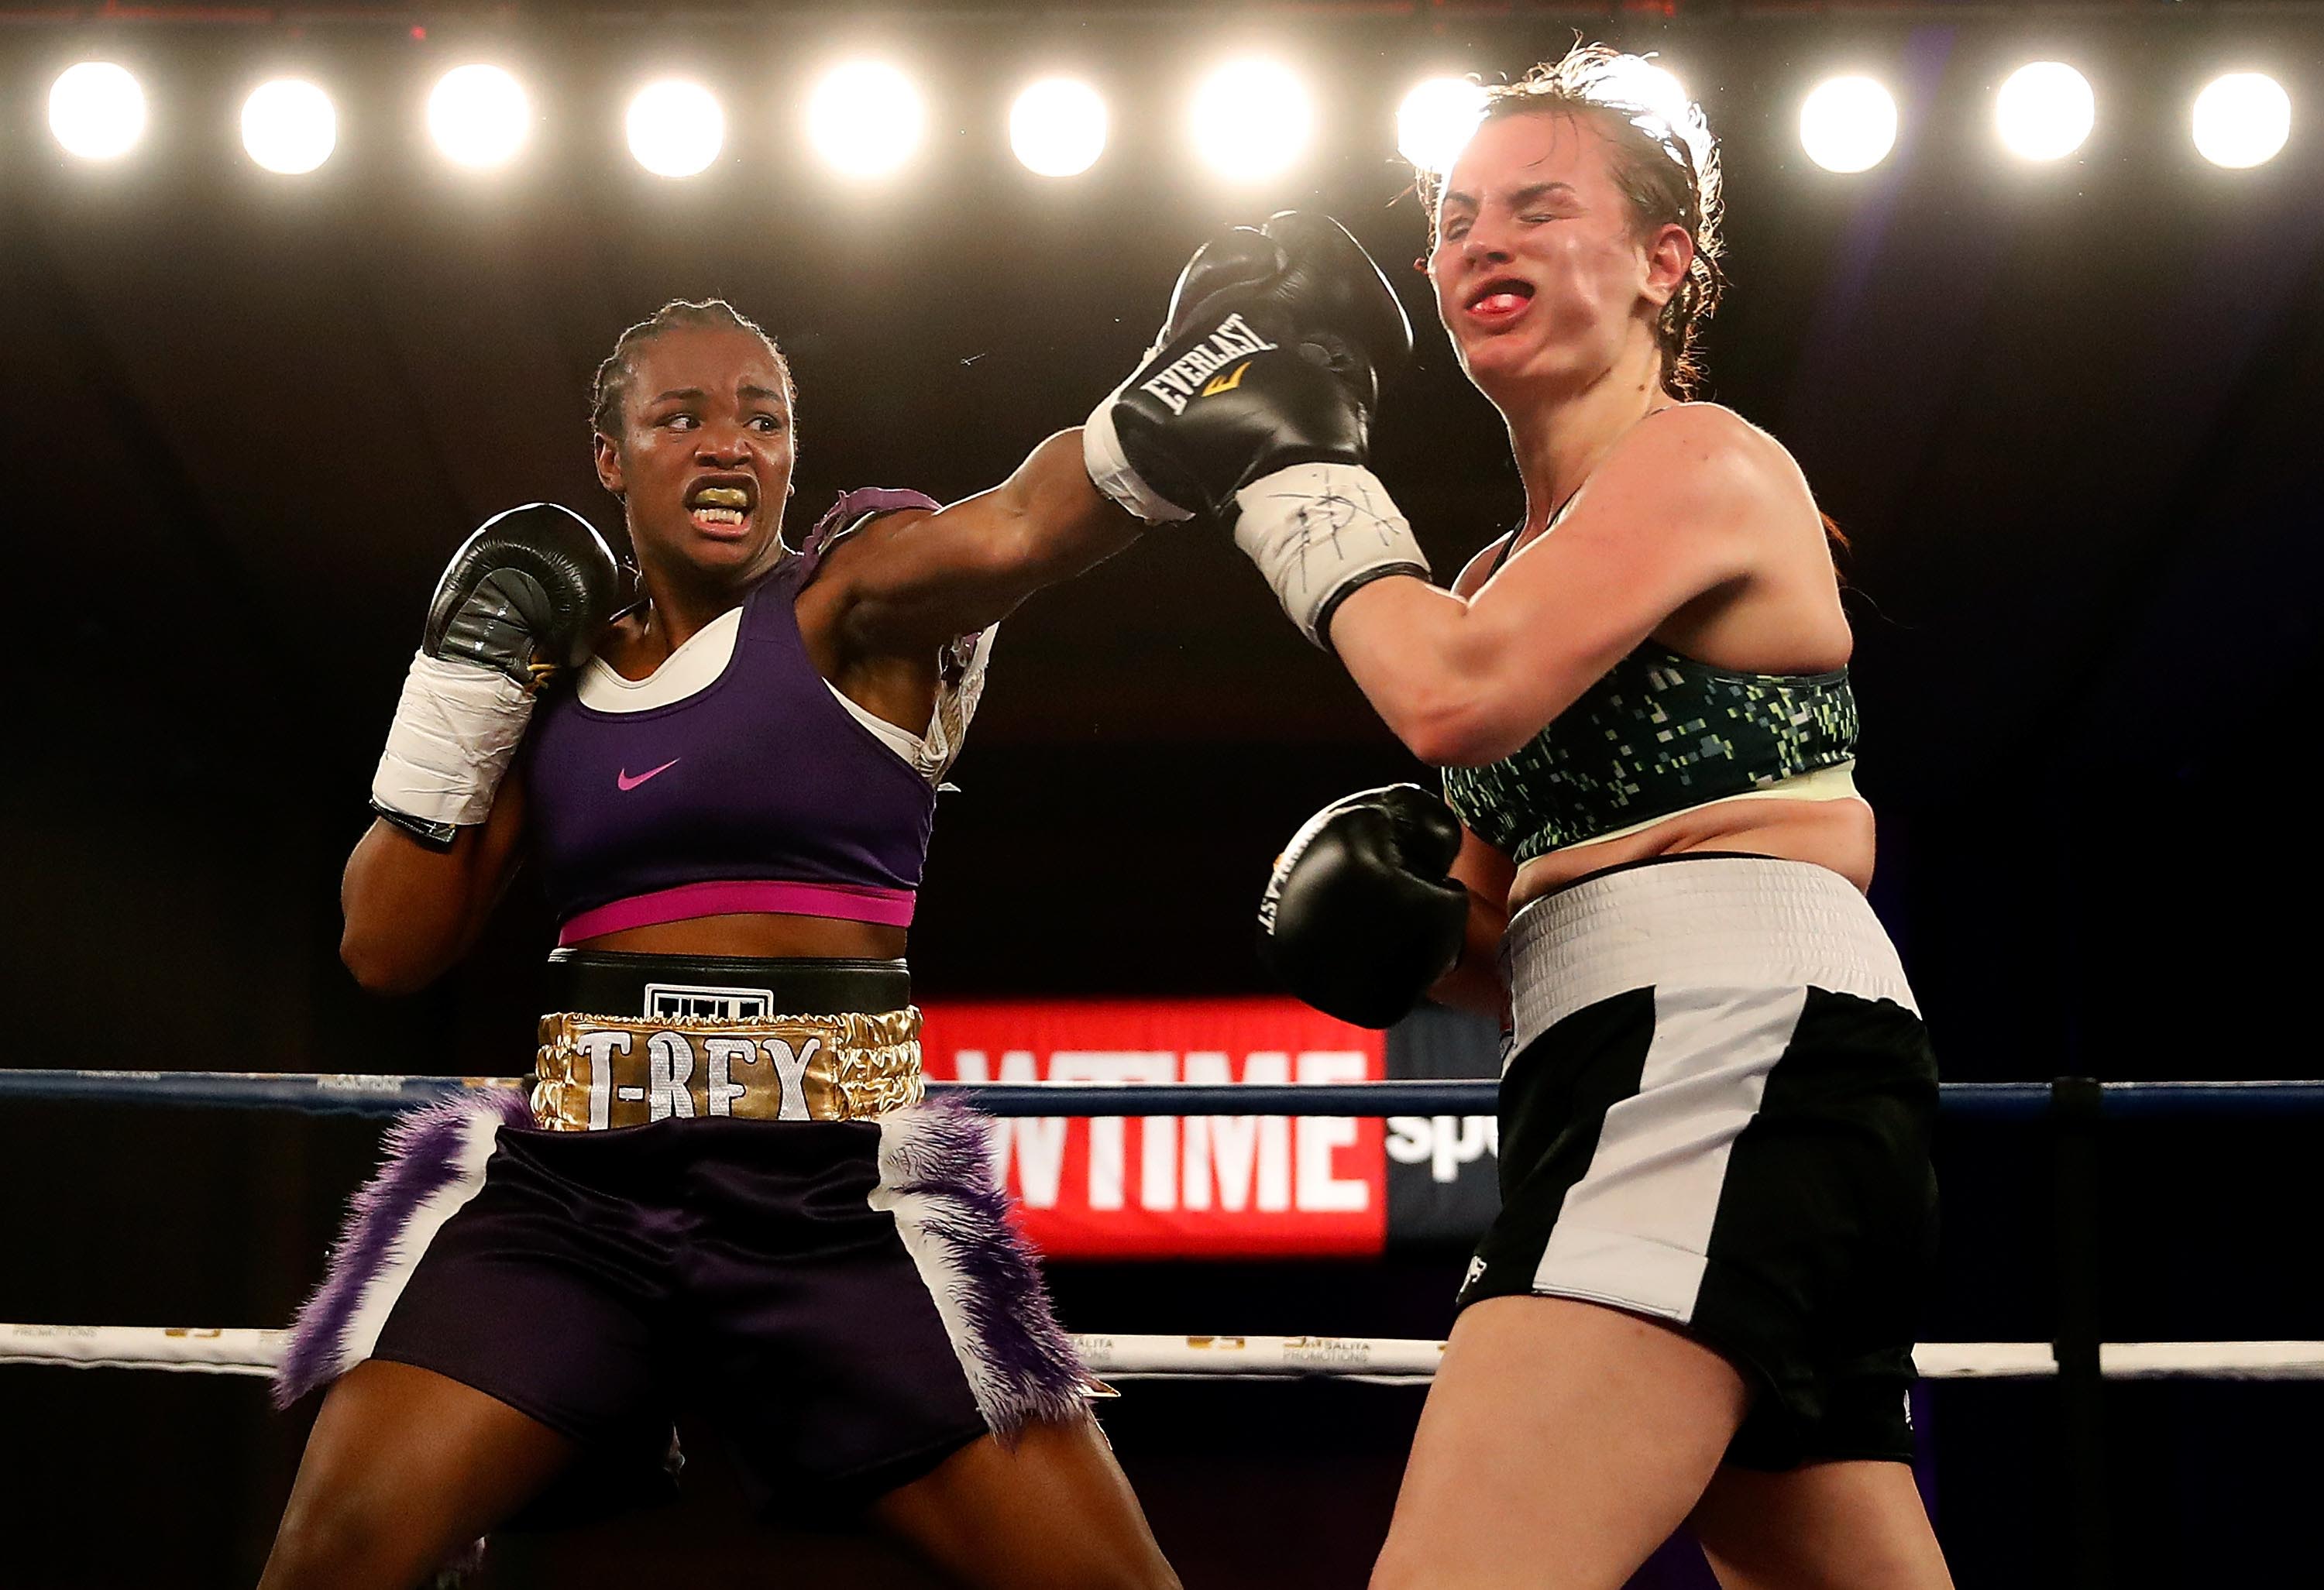 Claressa Shields fighting for gender equality for women boxers